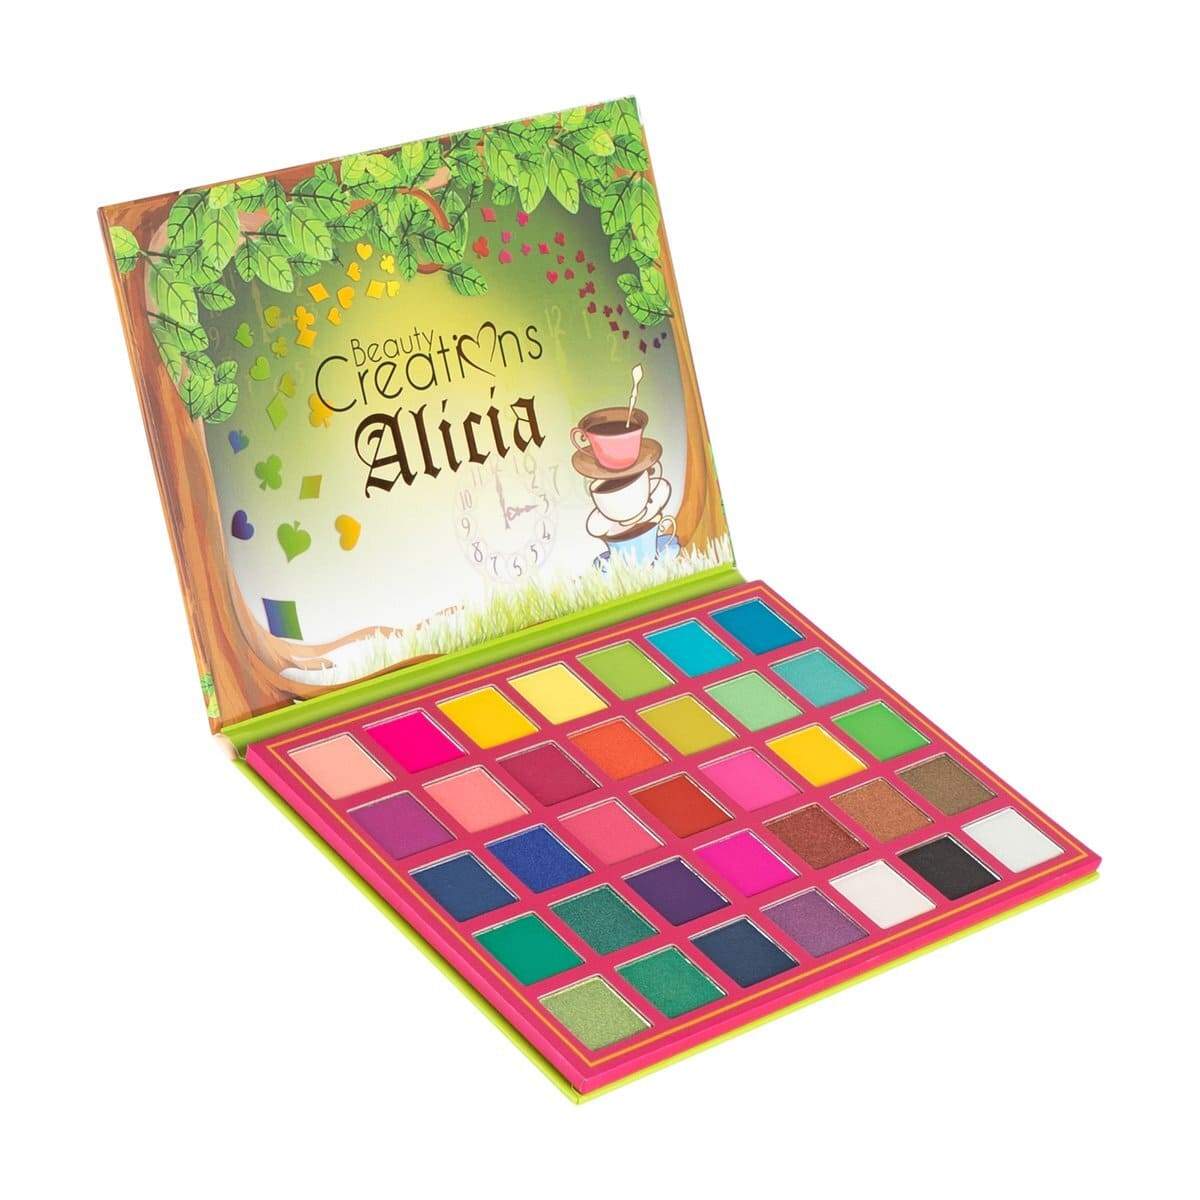 ALICIA 35 COLOR EYESHADOW PALETTE - BEAUTY CREATIONS